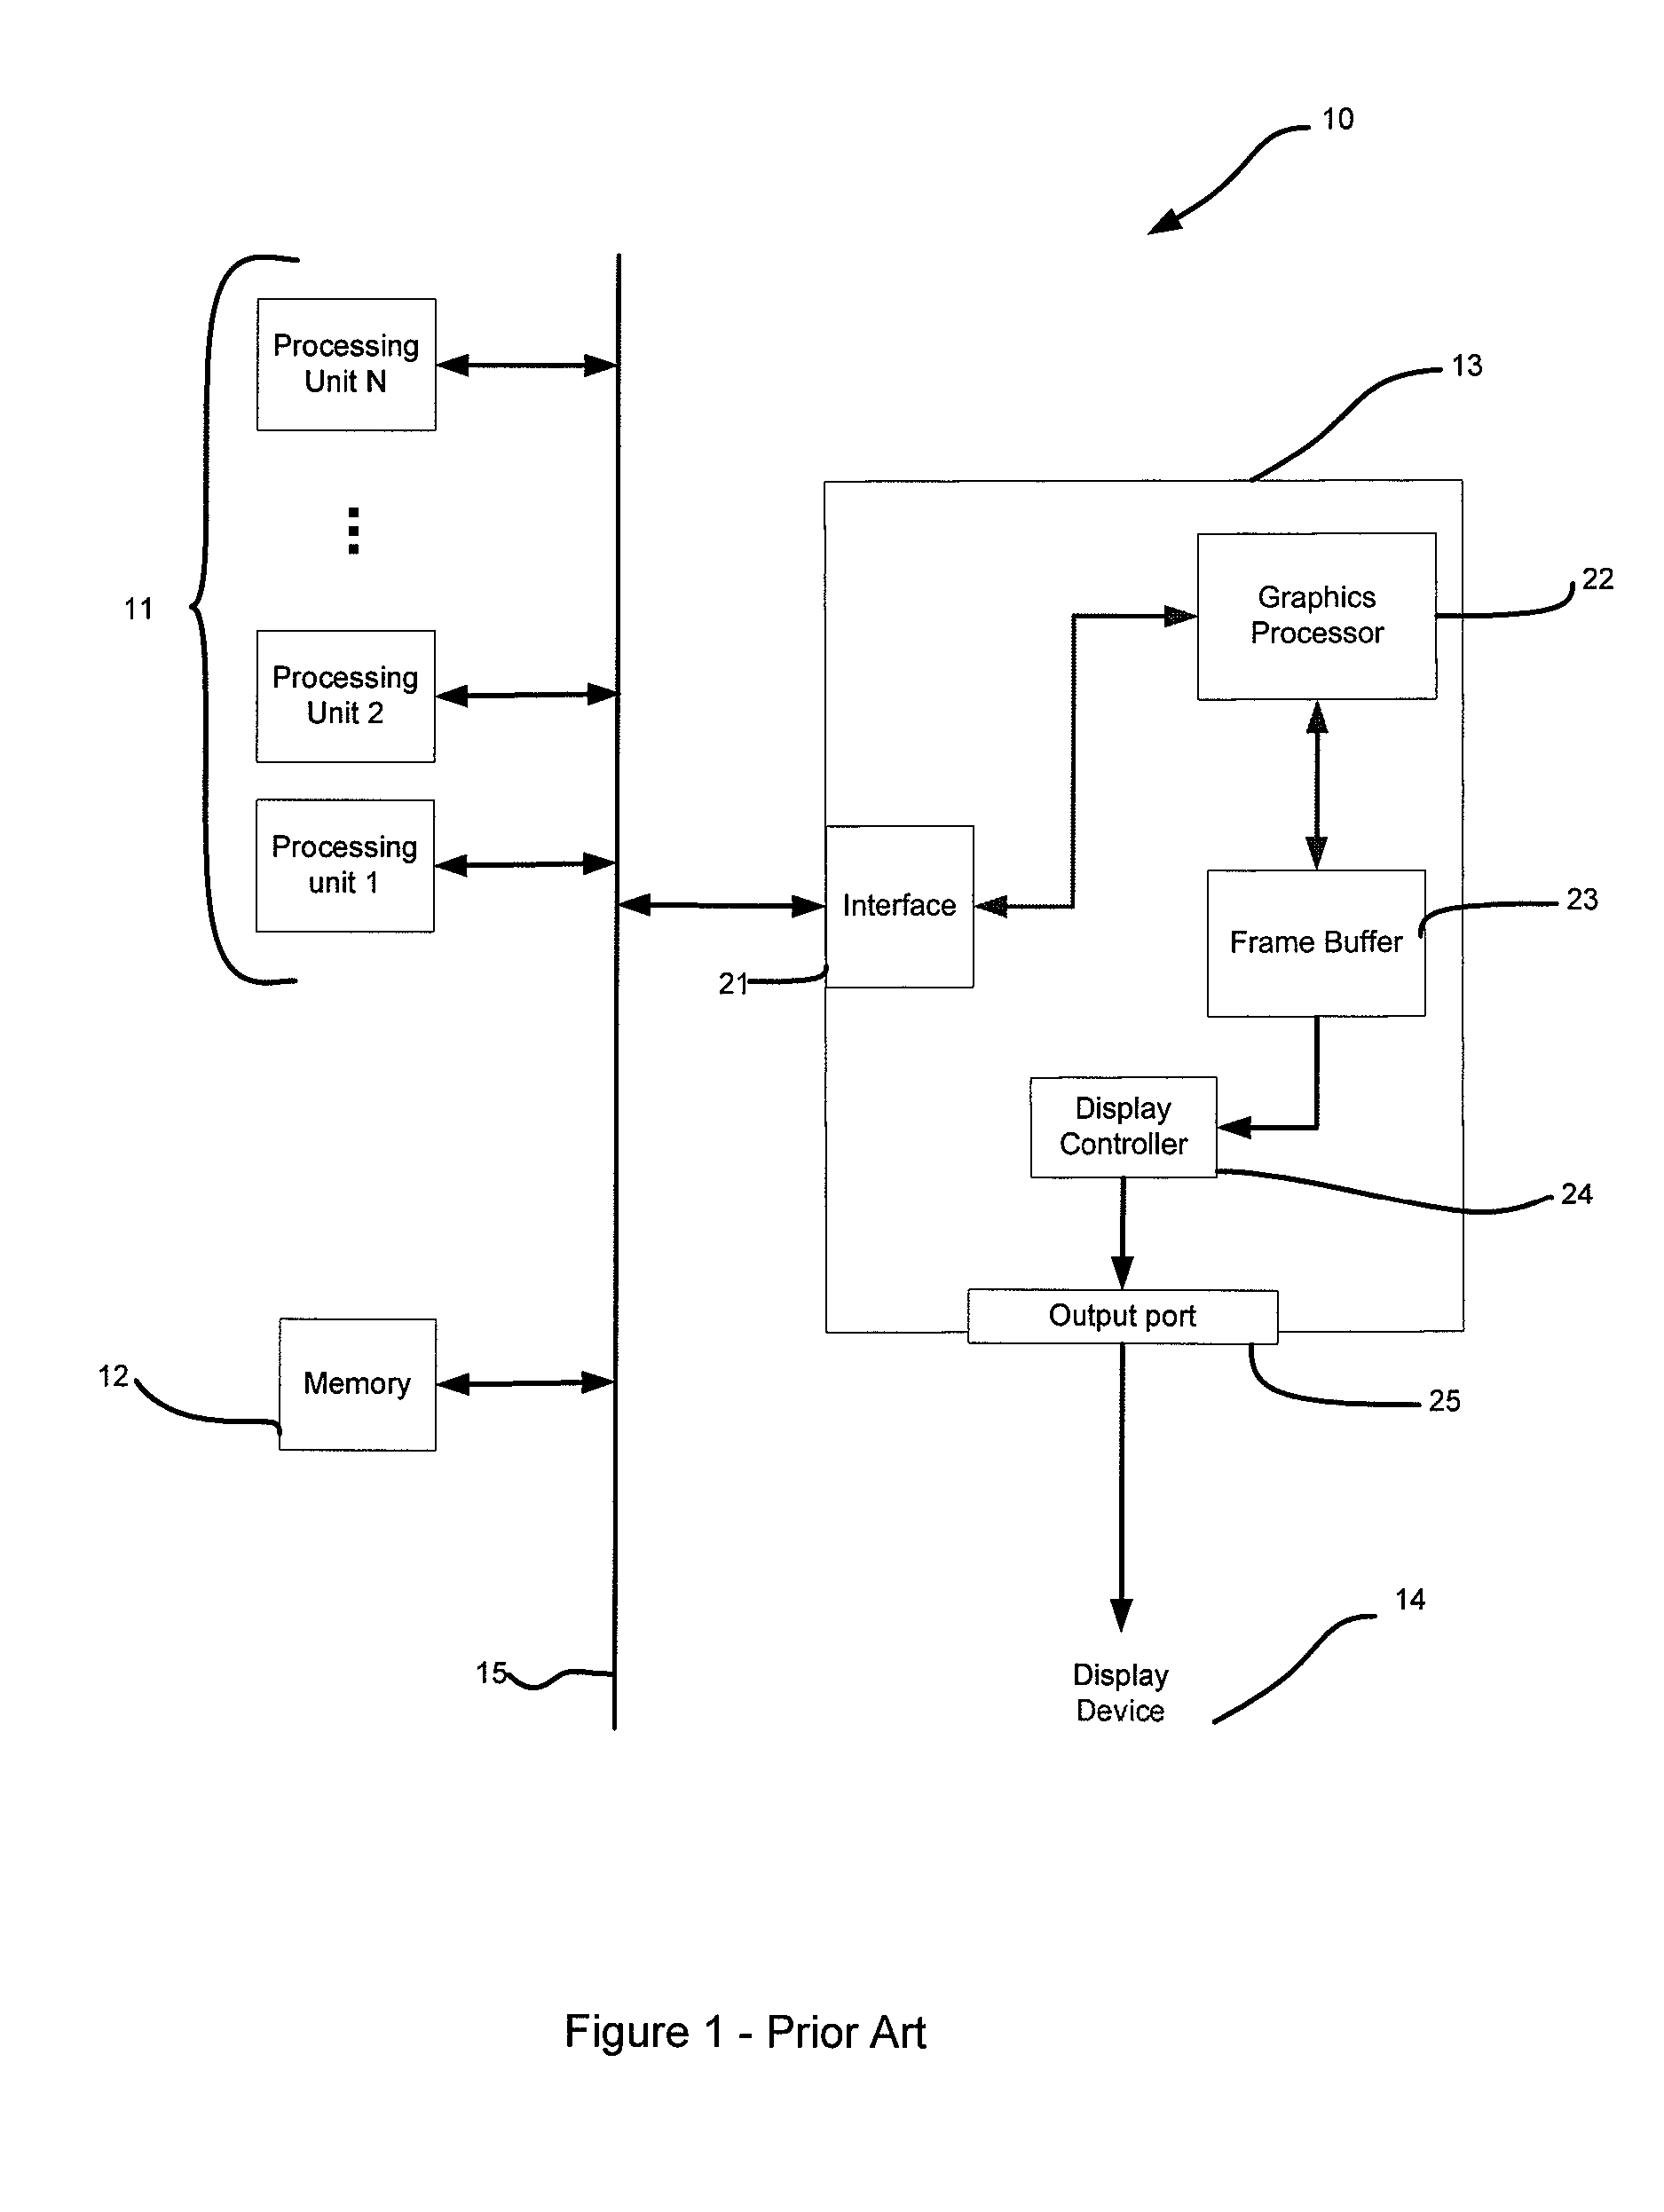 Systems for and methods of using a display controller to output data